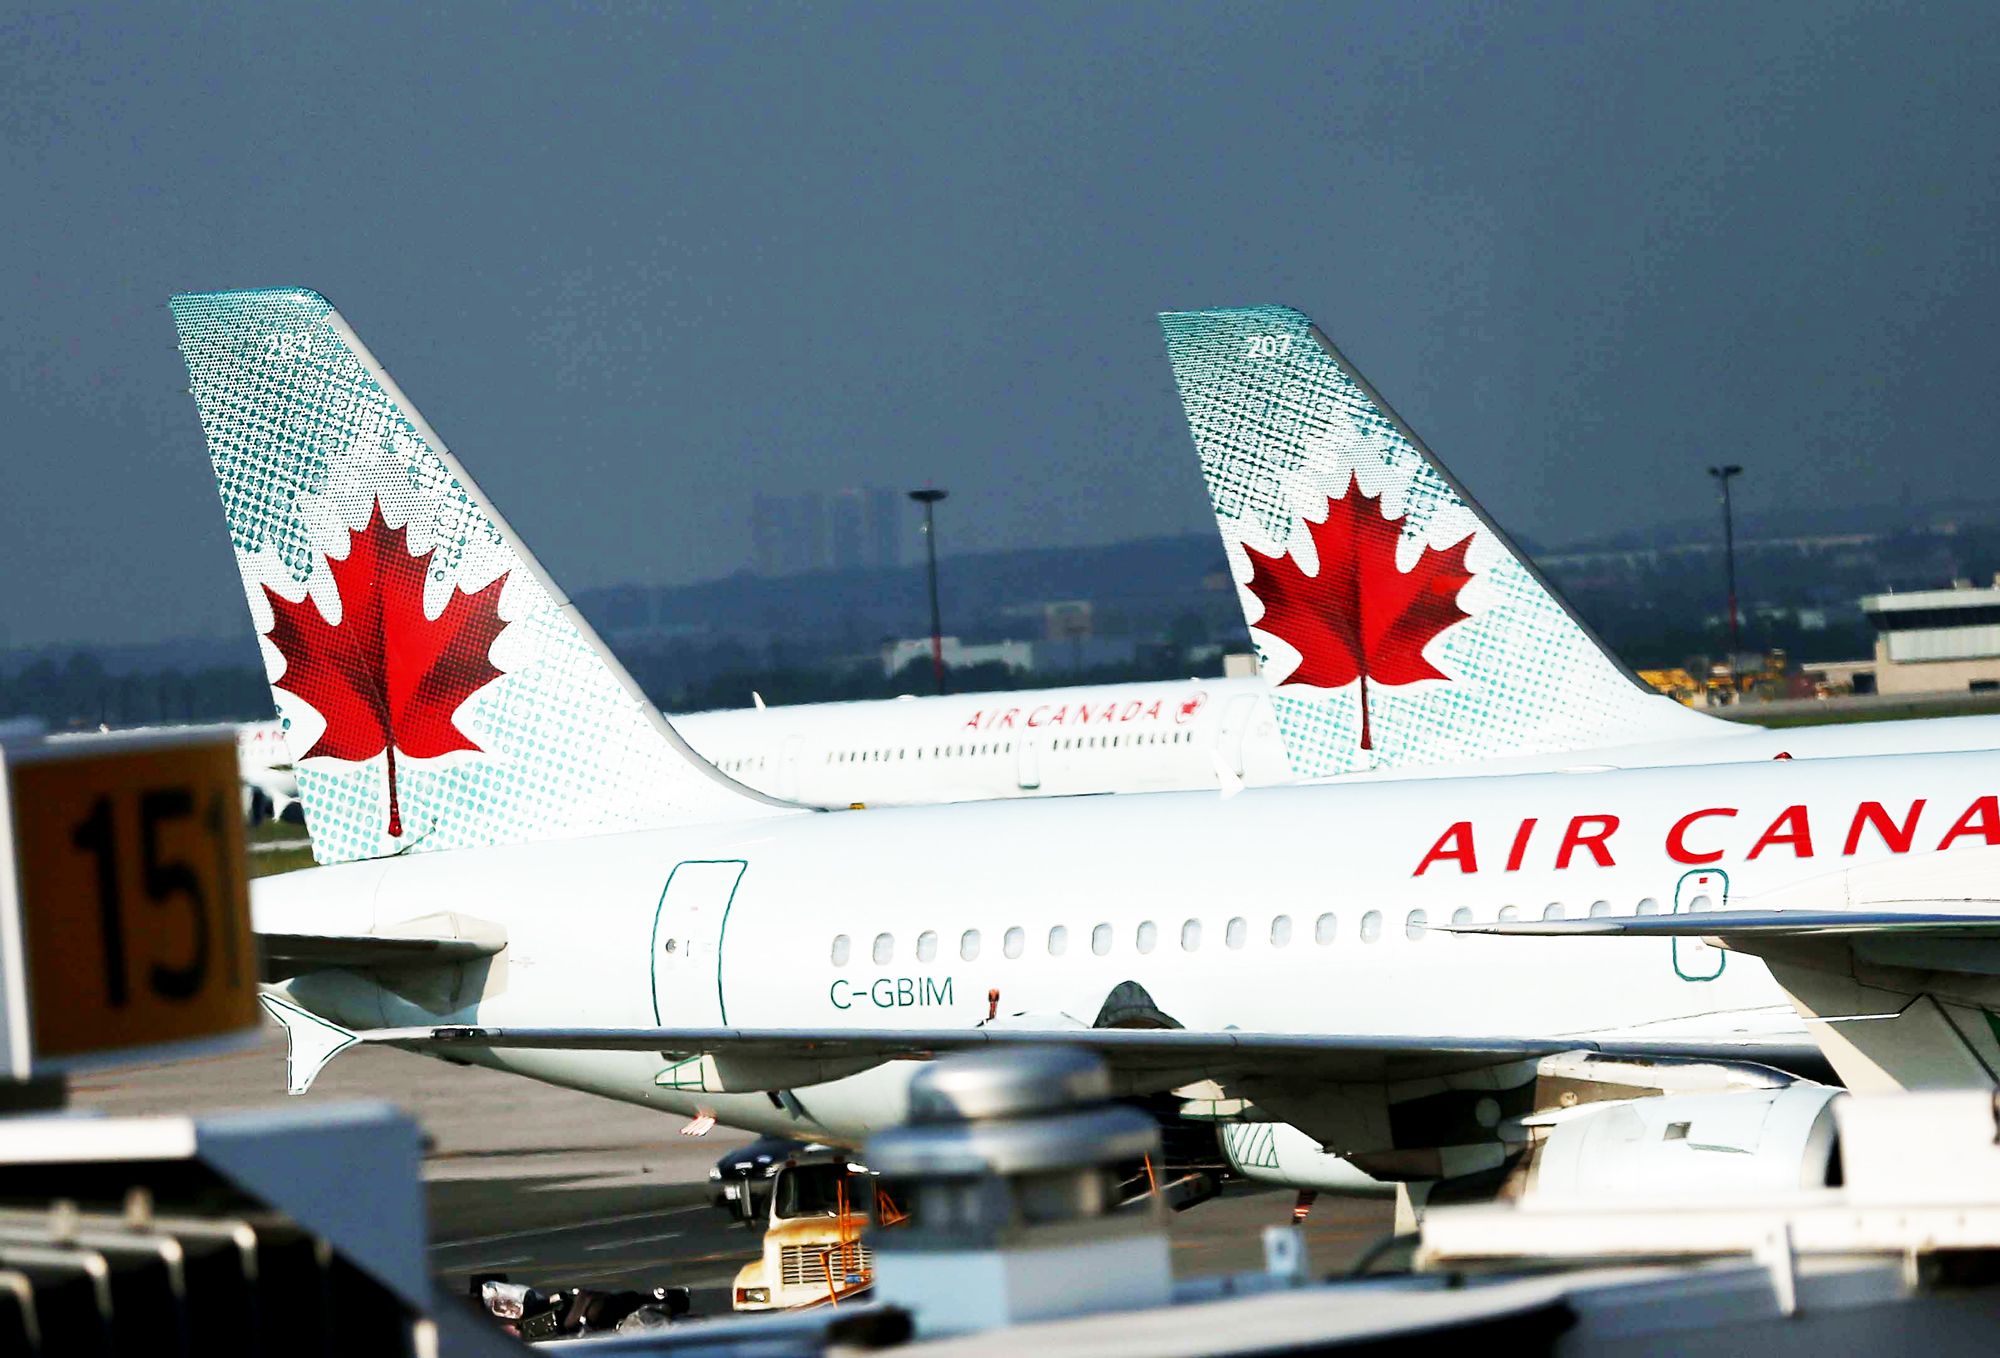 Air Canada flight diverted to Hawaii after turbulence, injuries reported